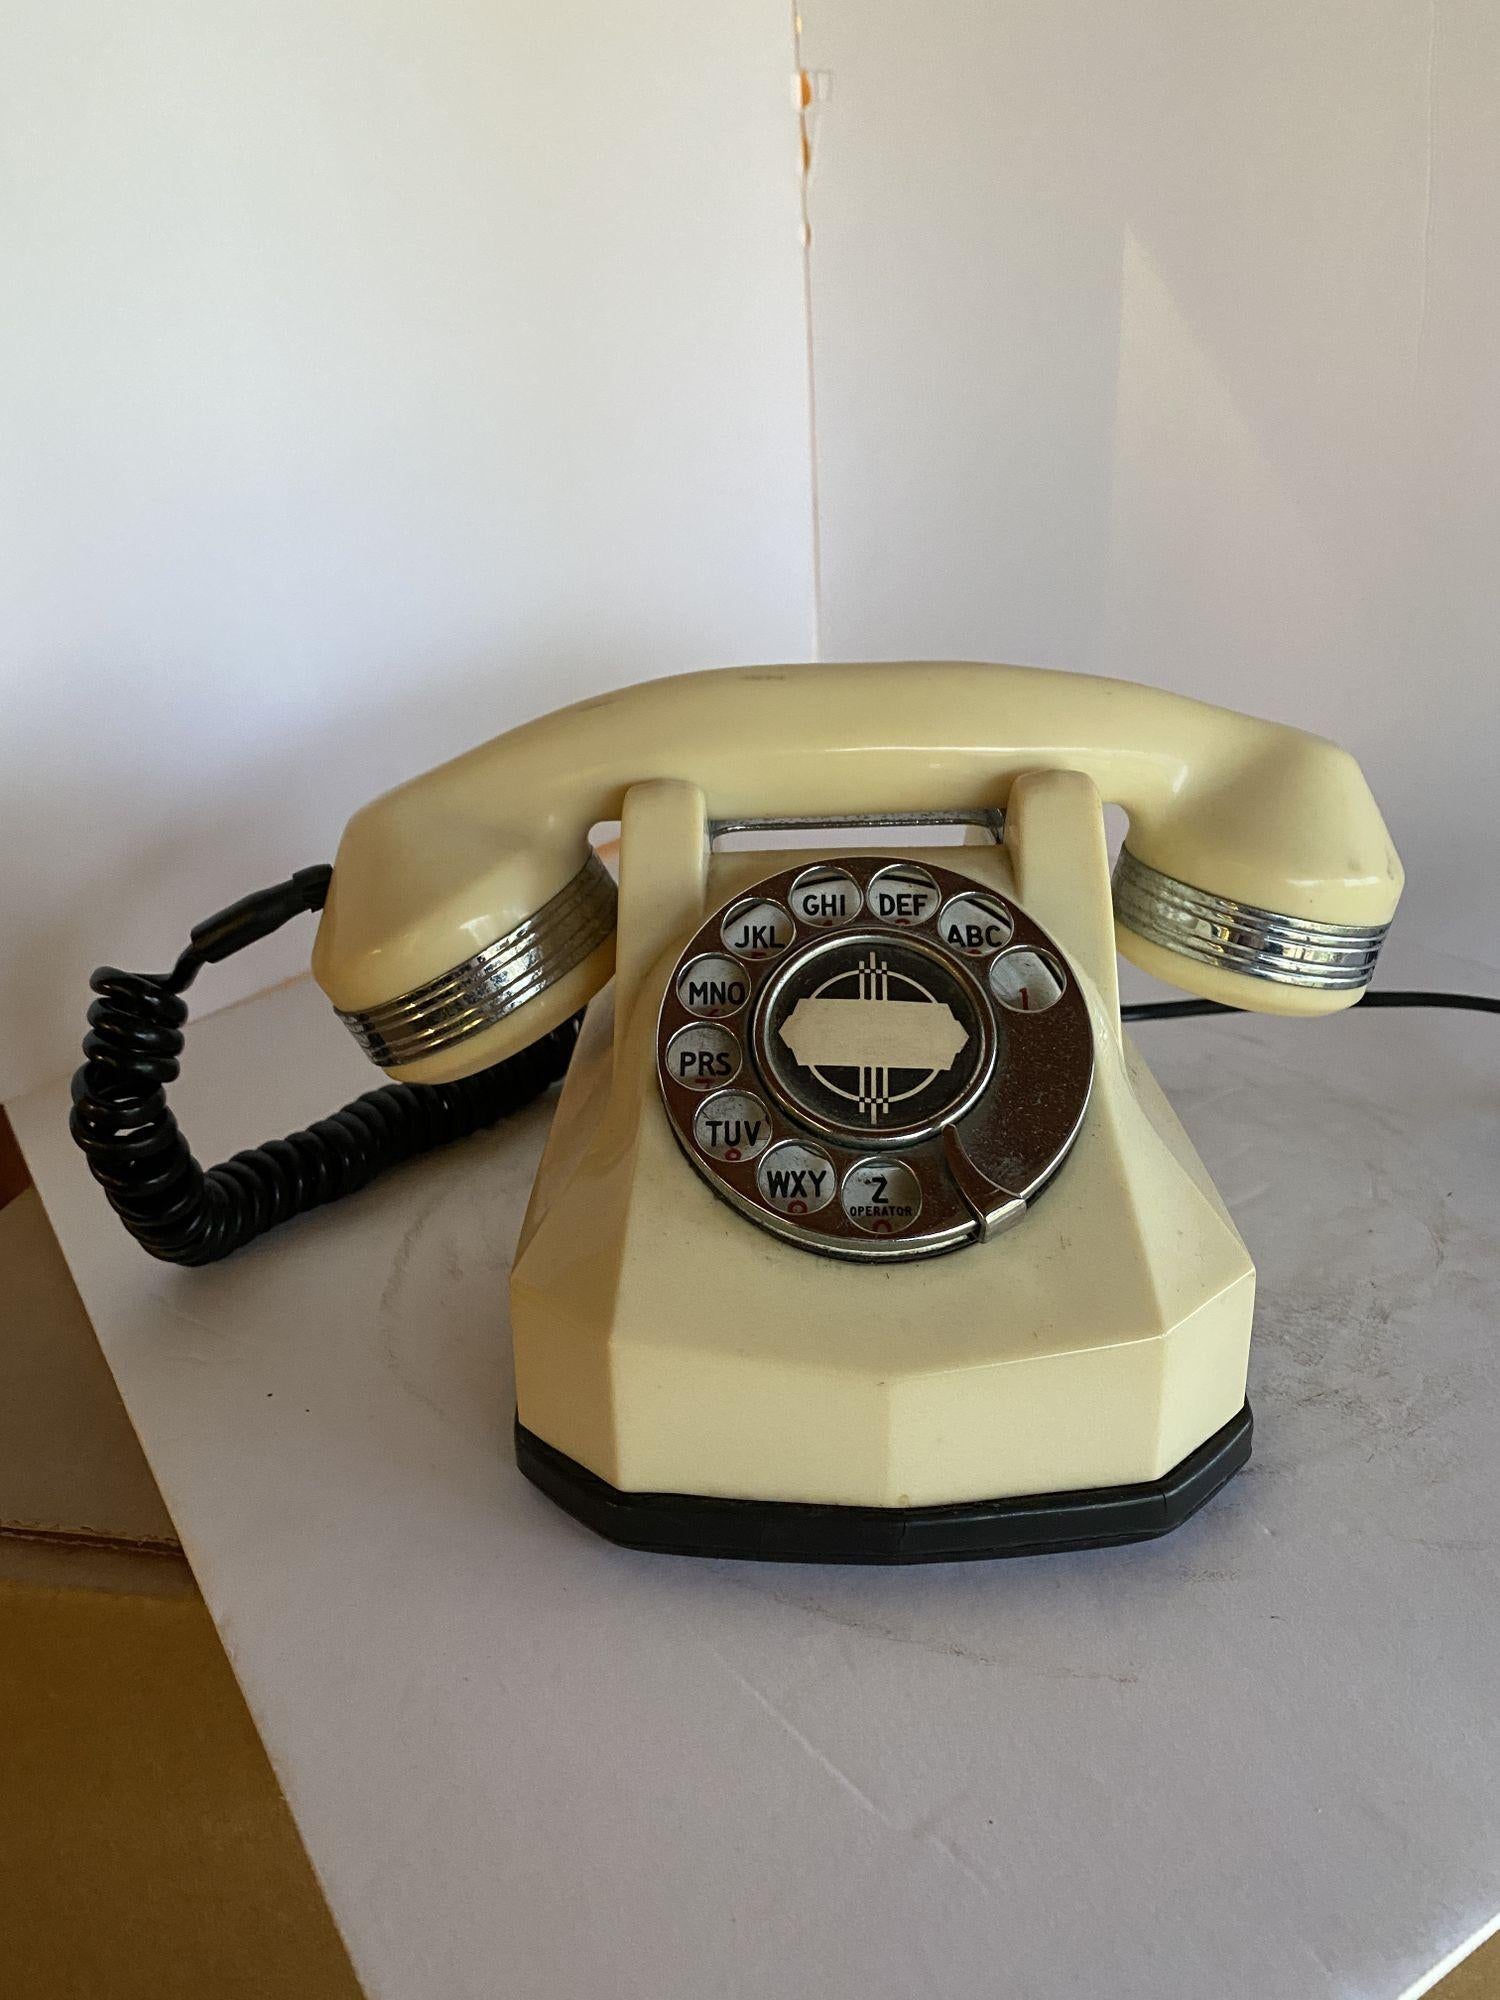 This wonderful working example of 1930s design is sure to fit into your period decorating scheme. The RRRING of this classic is unlike anything available in modern phones, and it is will definitely get the attention of everyone within your